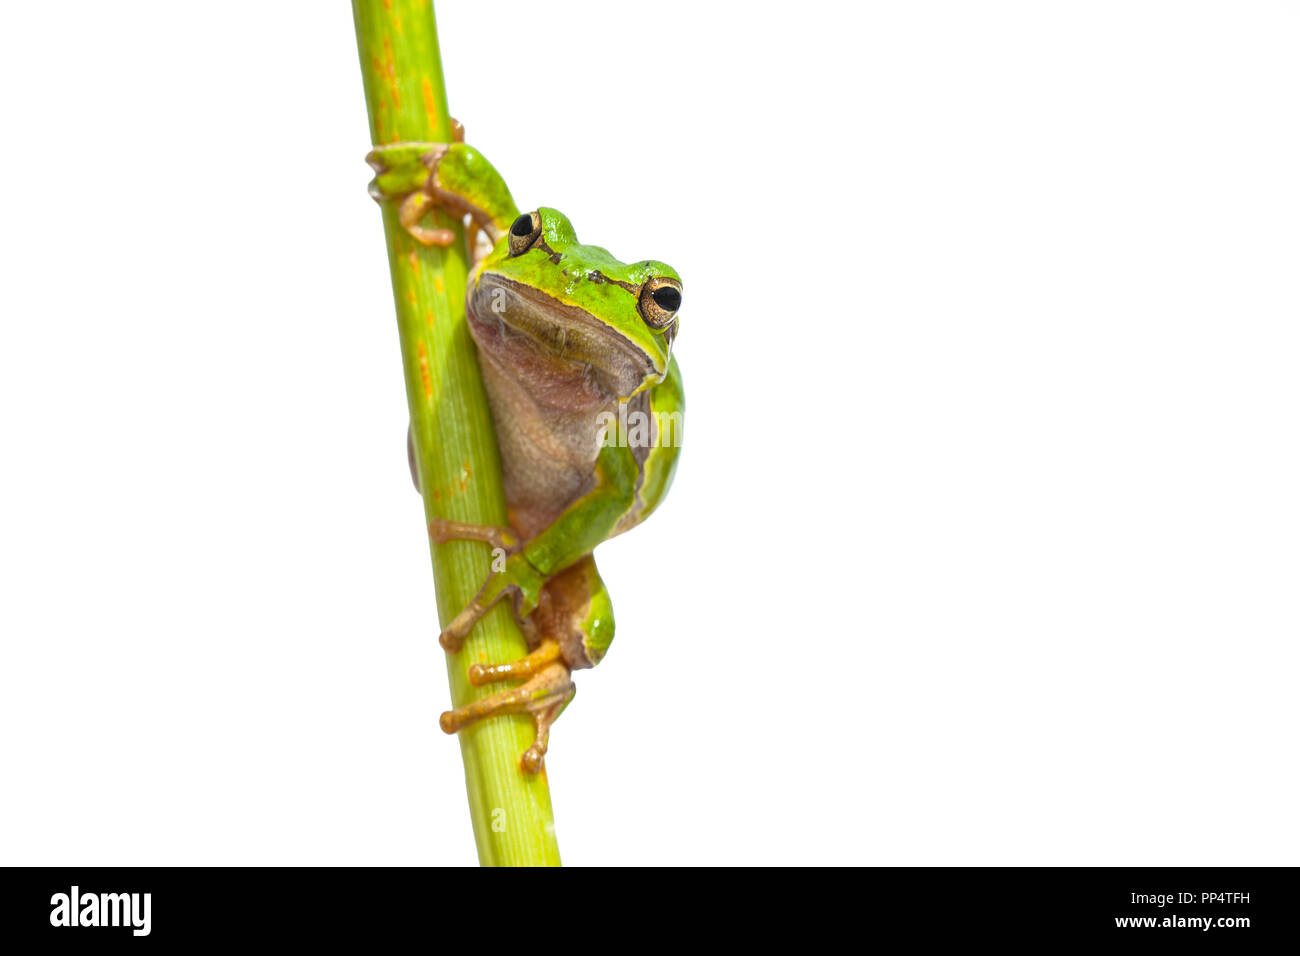 Green European Tree Frog (Hyla arborea) Looking in the camera while climbing in a vertical stick, isolated on white background Stock Photo